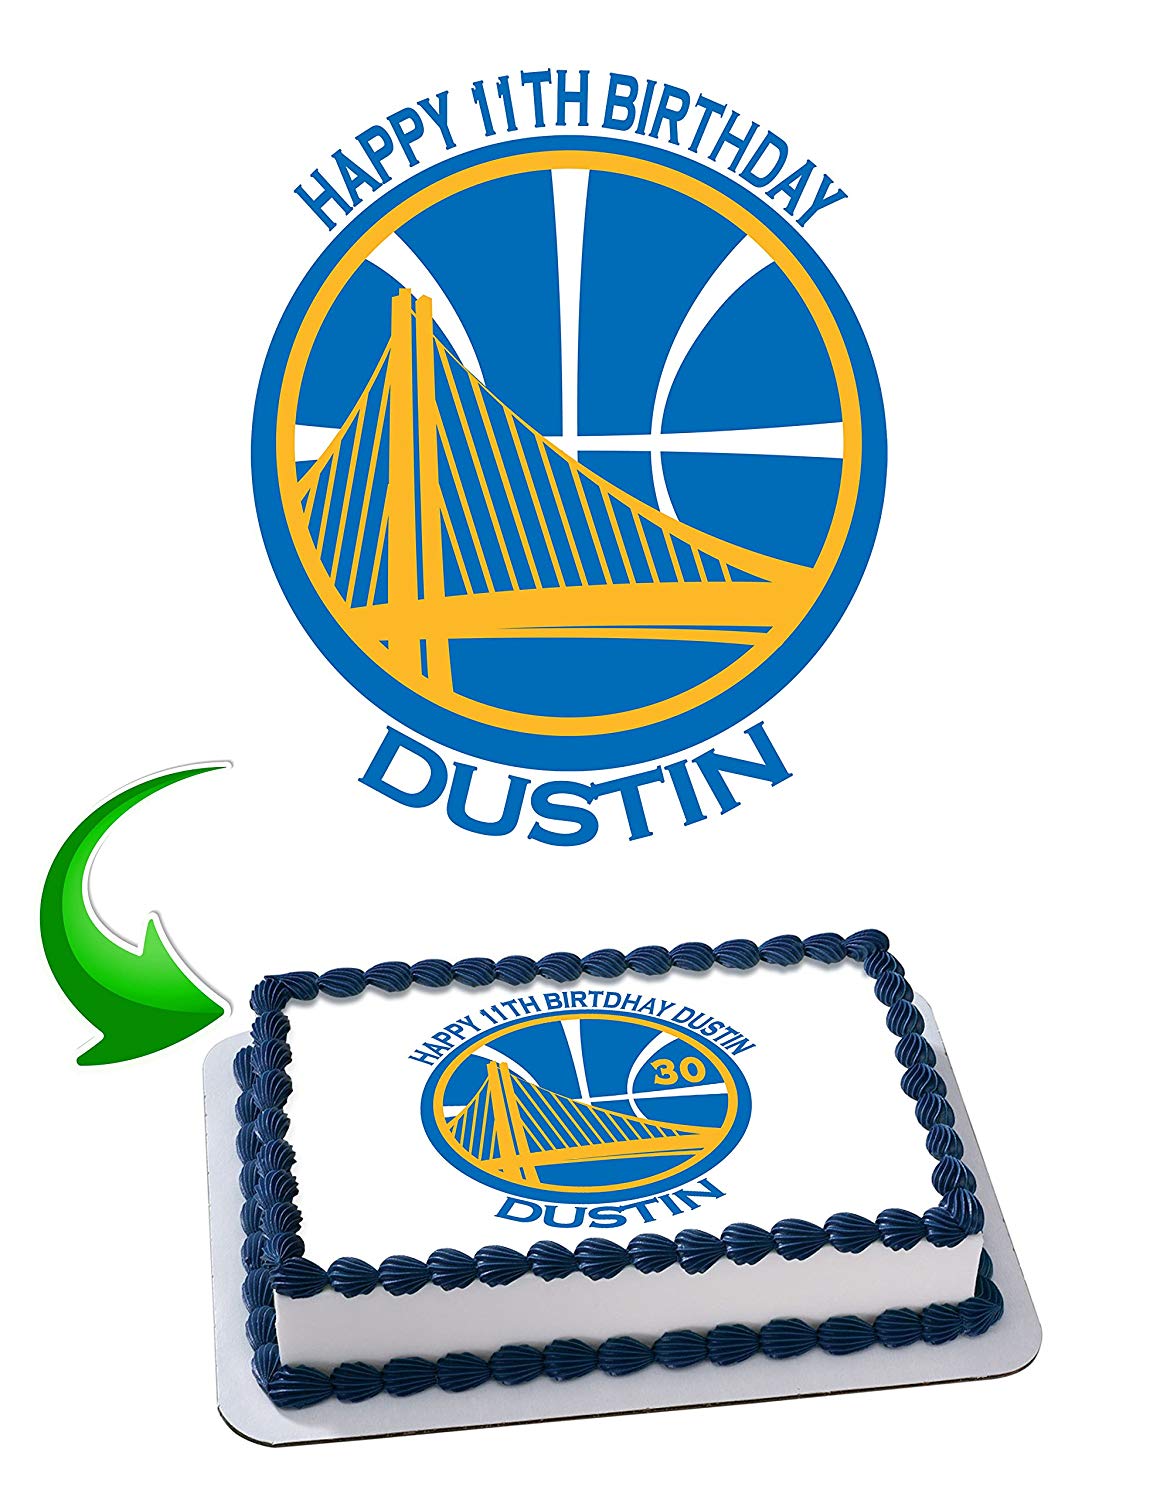 Golden State Cake Topper Stephen Curry Cake Topper NBA Cake Topper Golden  State Caprisun Golden State Boxes Golden State Chips Bags 